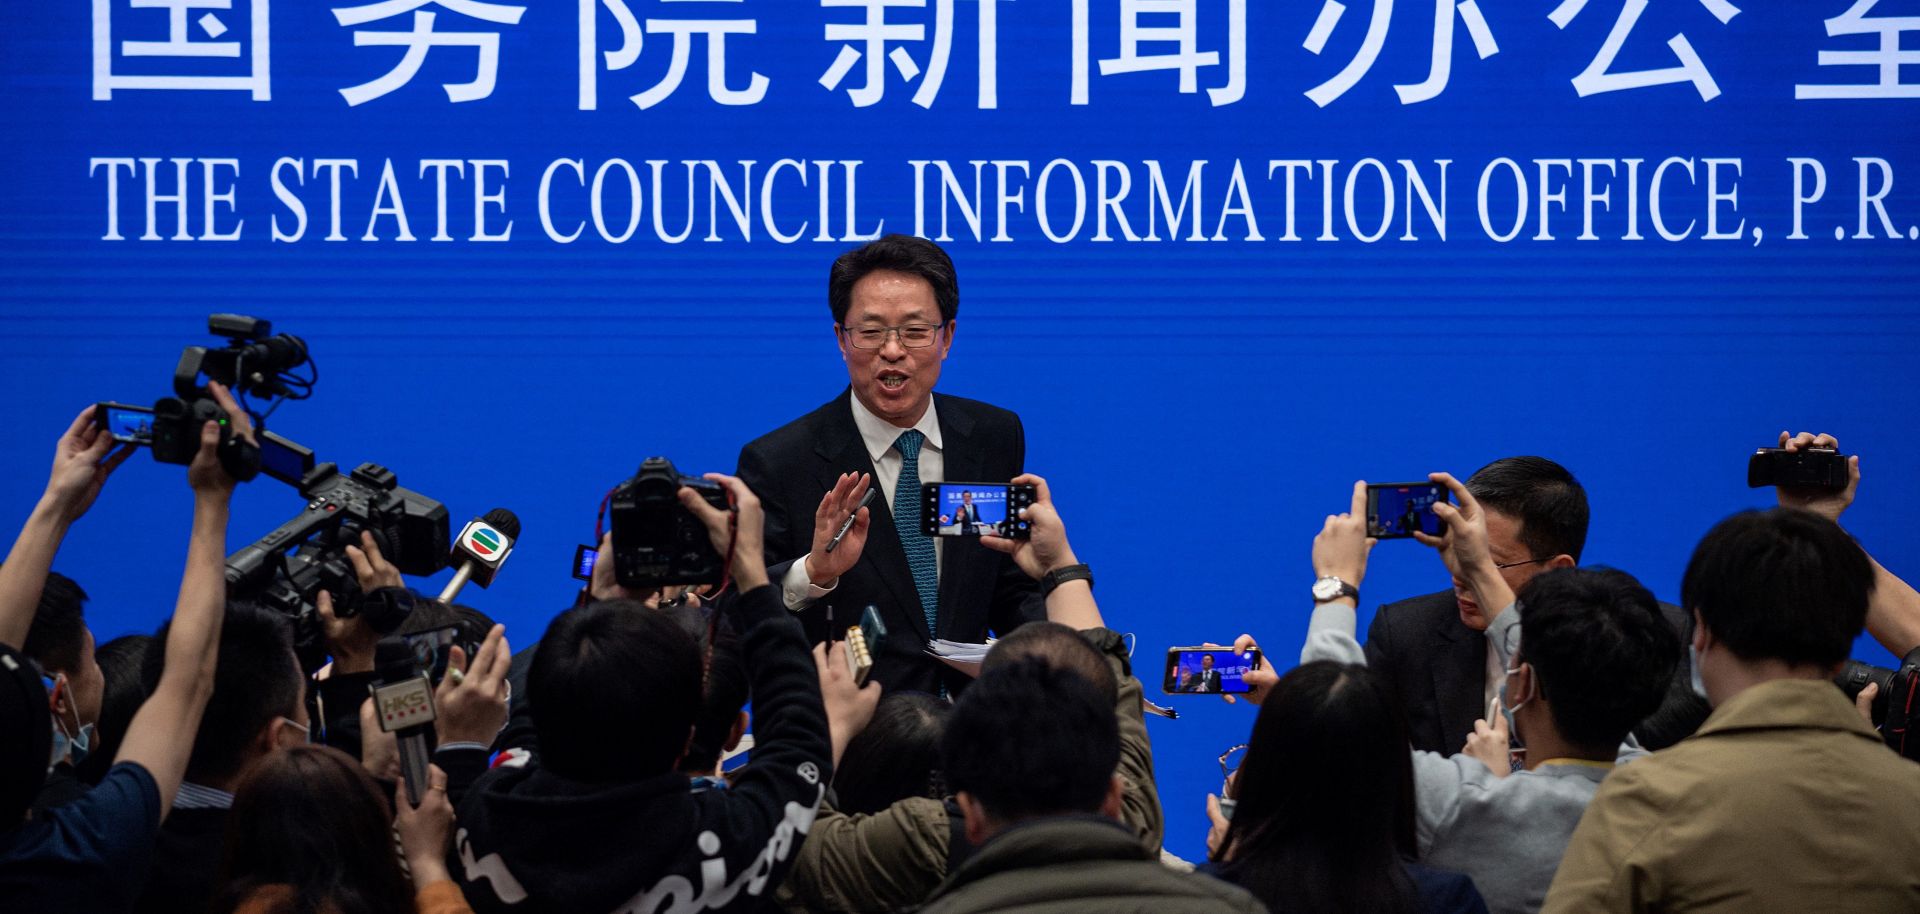 Zhang Xiaoming (C), Executive Deputy Director of the Hong Kong and Macao Affairs Office of the State Council, at the end of a State Council press conference on Hong Kong electoral reform March 12, 2021, in Beijing.